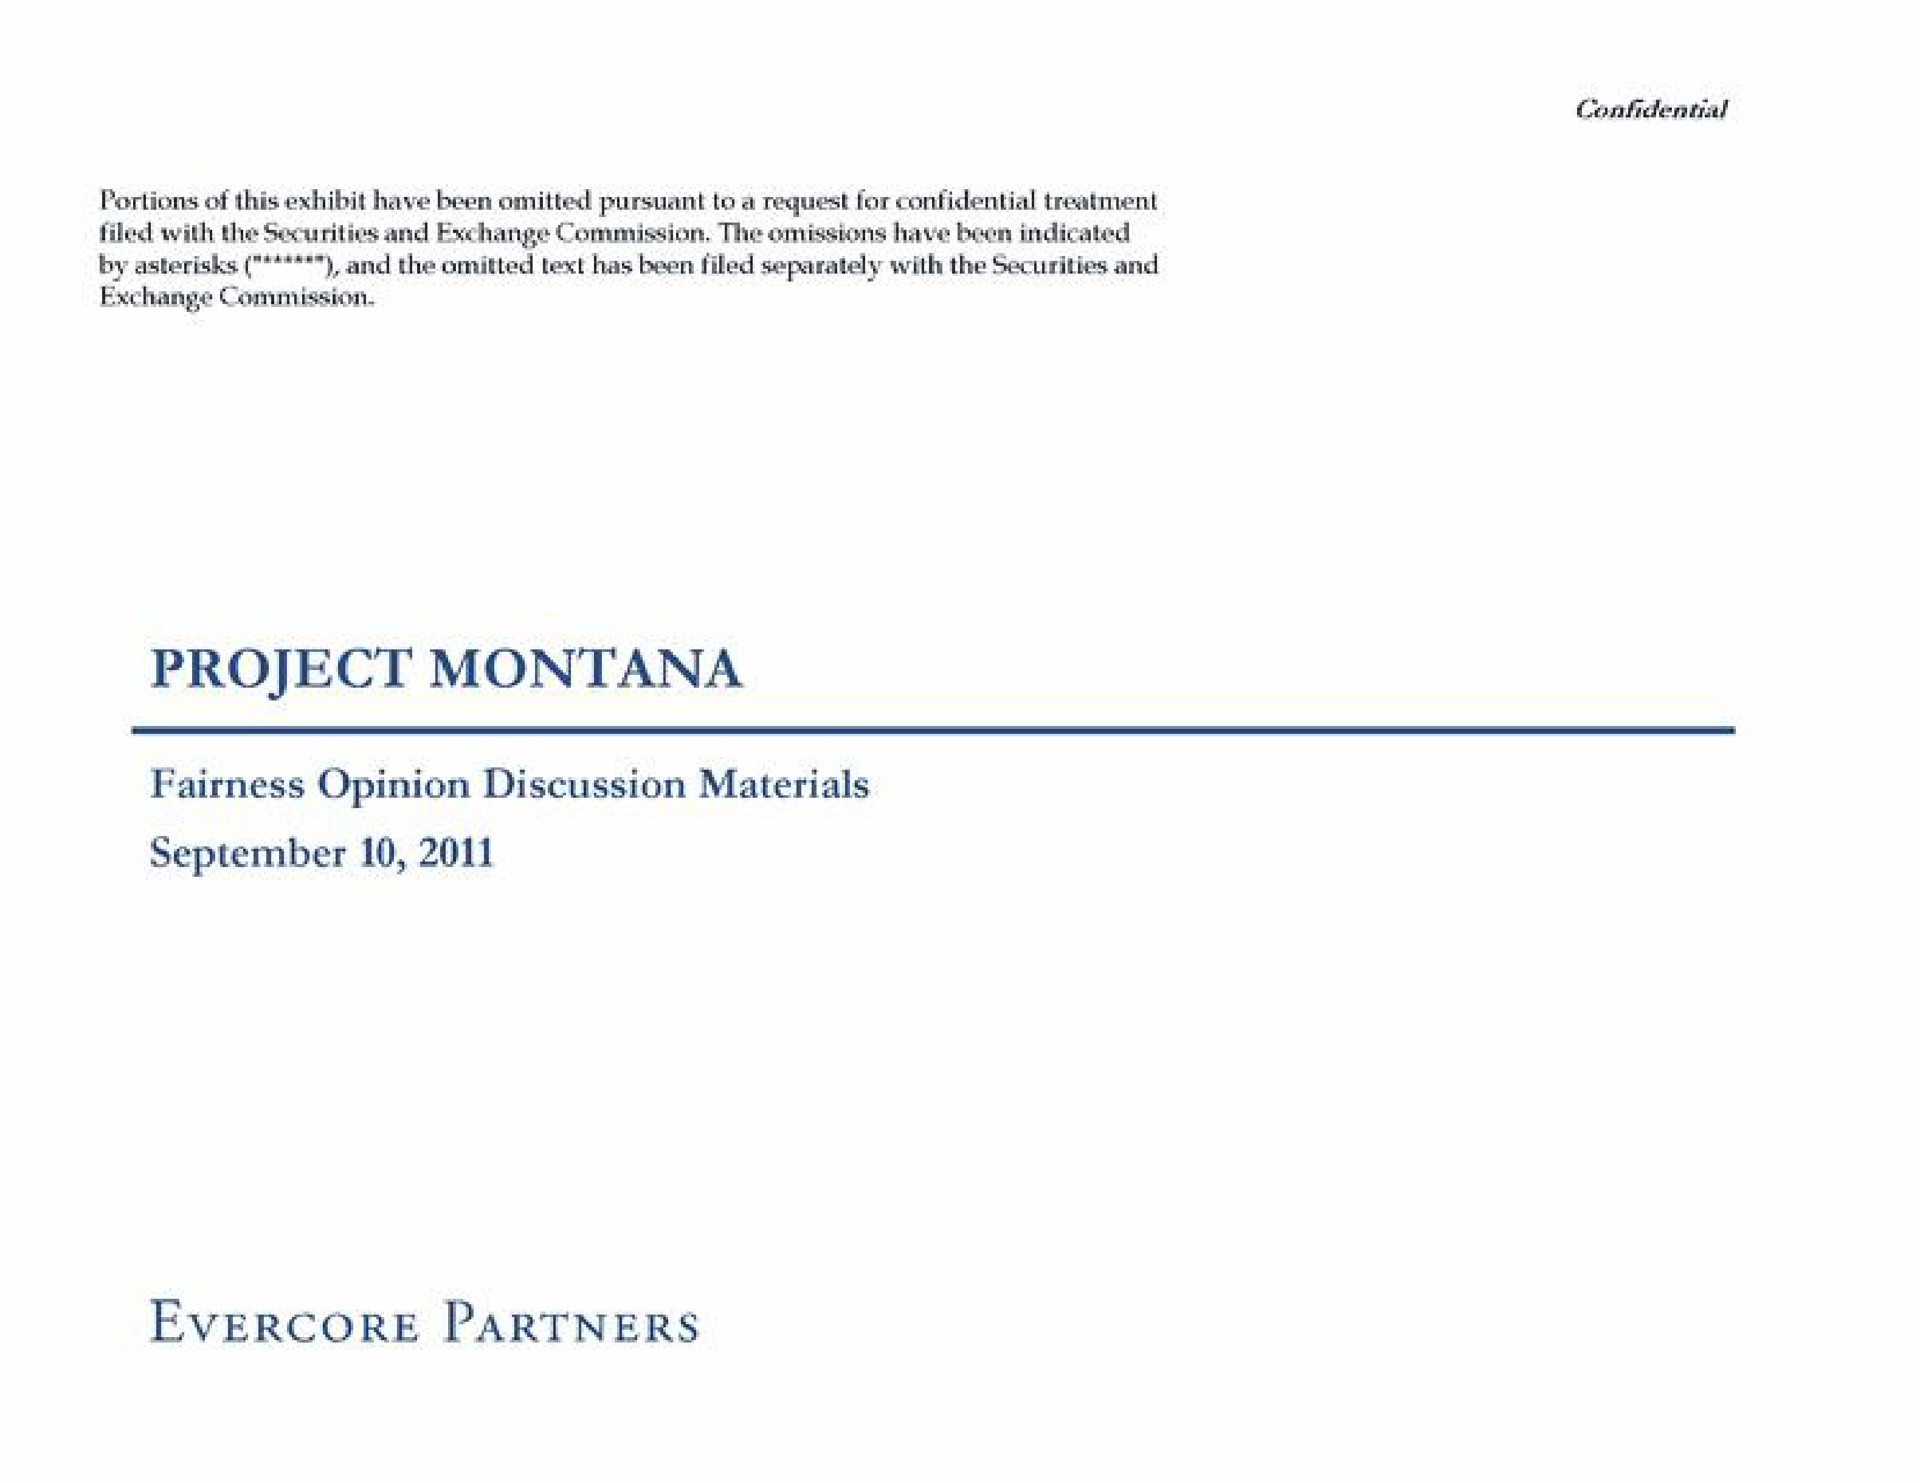 project montana fairness opinion discussion materials partners | Evercore